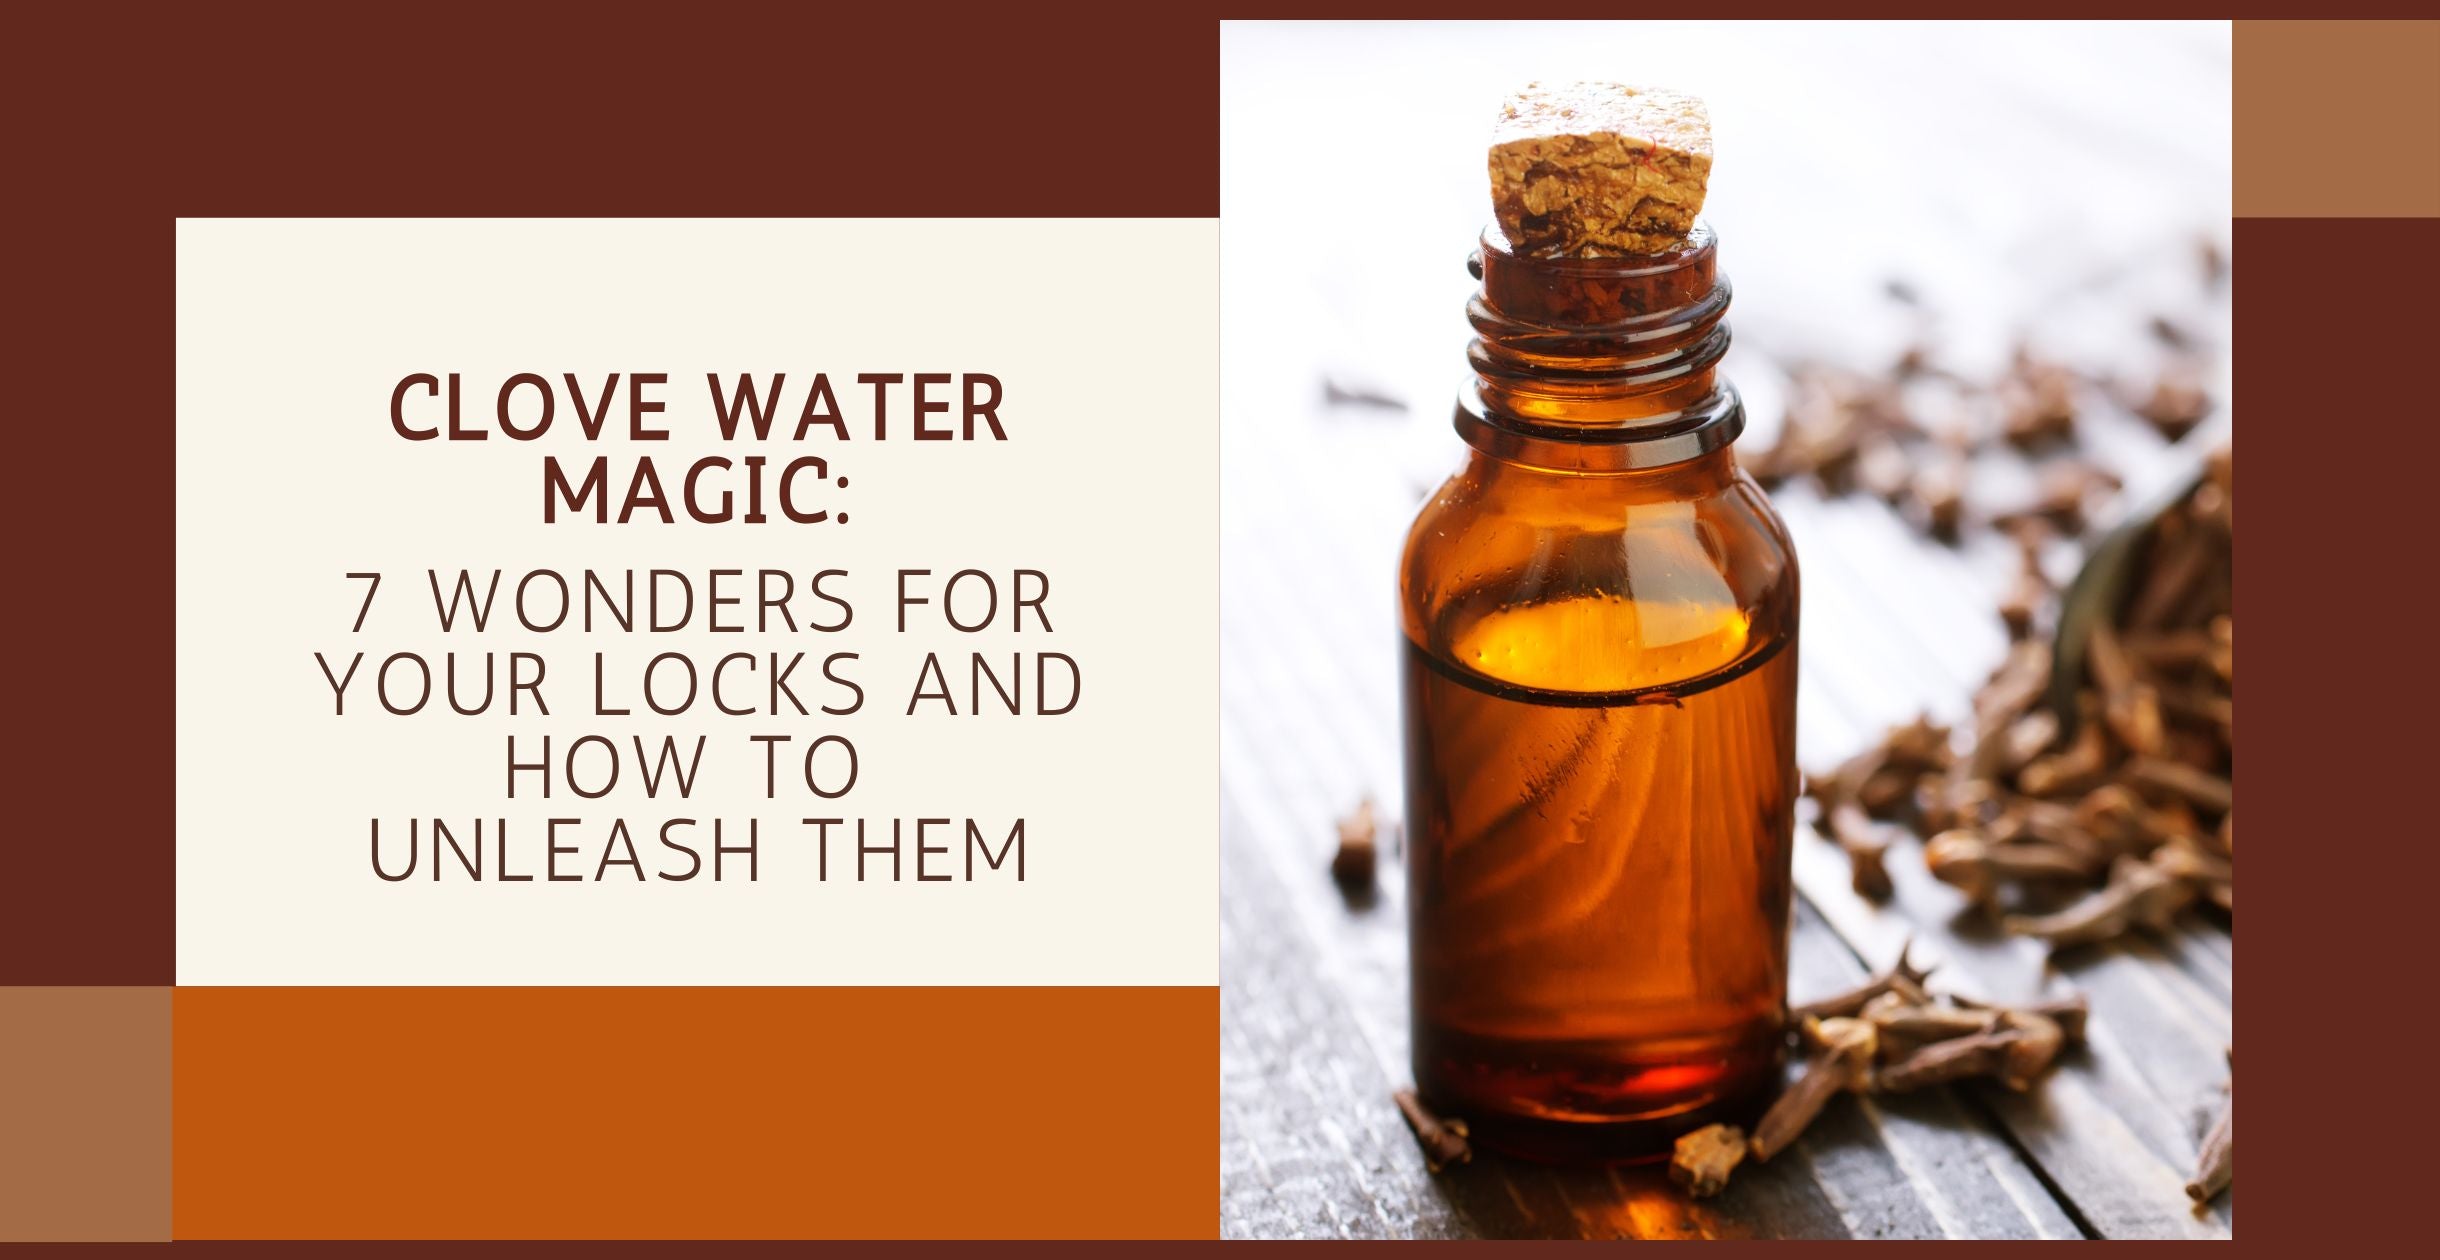 Clove Water Magic: 7 Wonders for Your Locks and How to Unleash Them